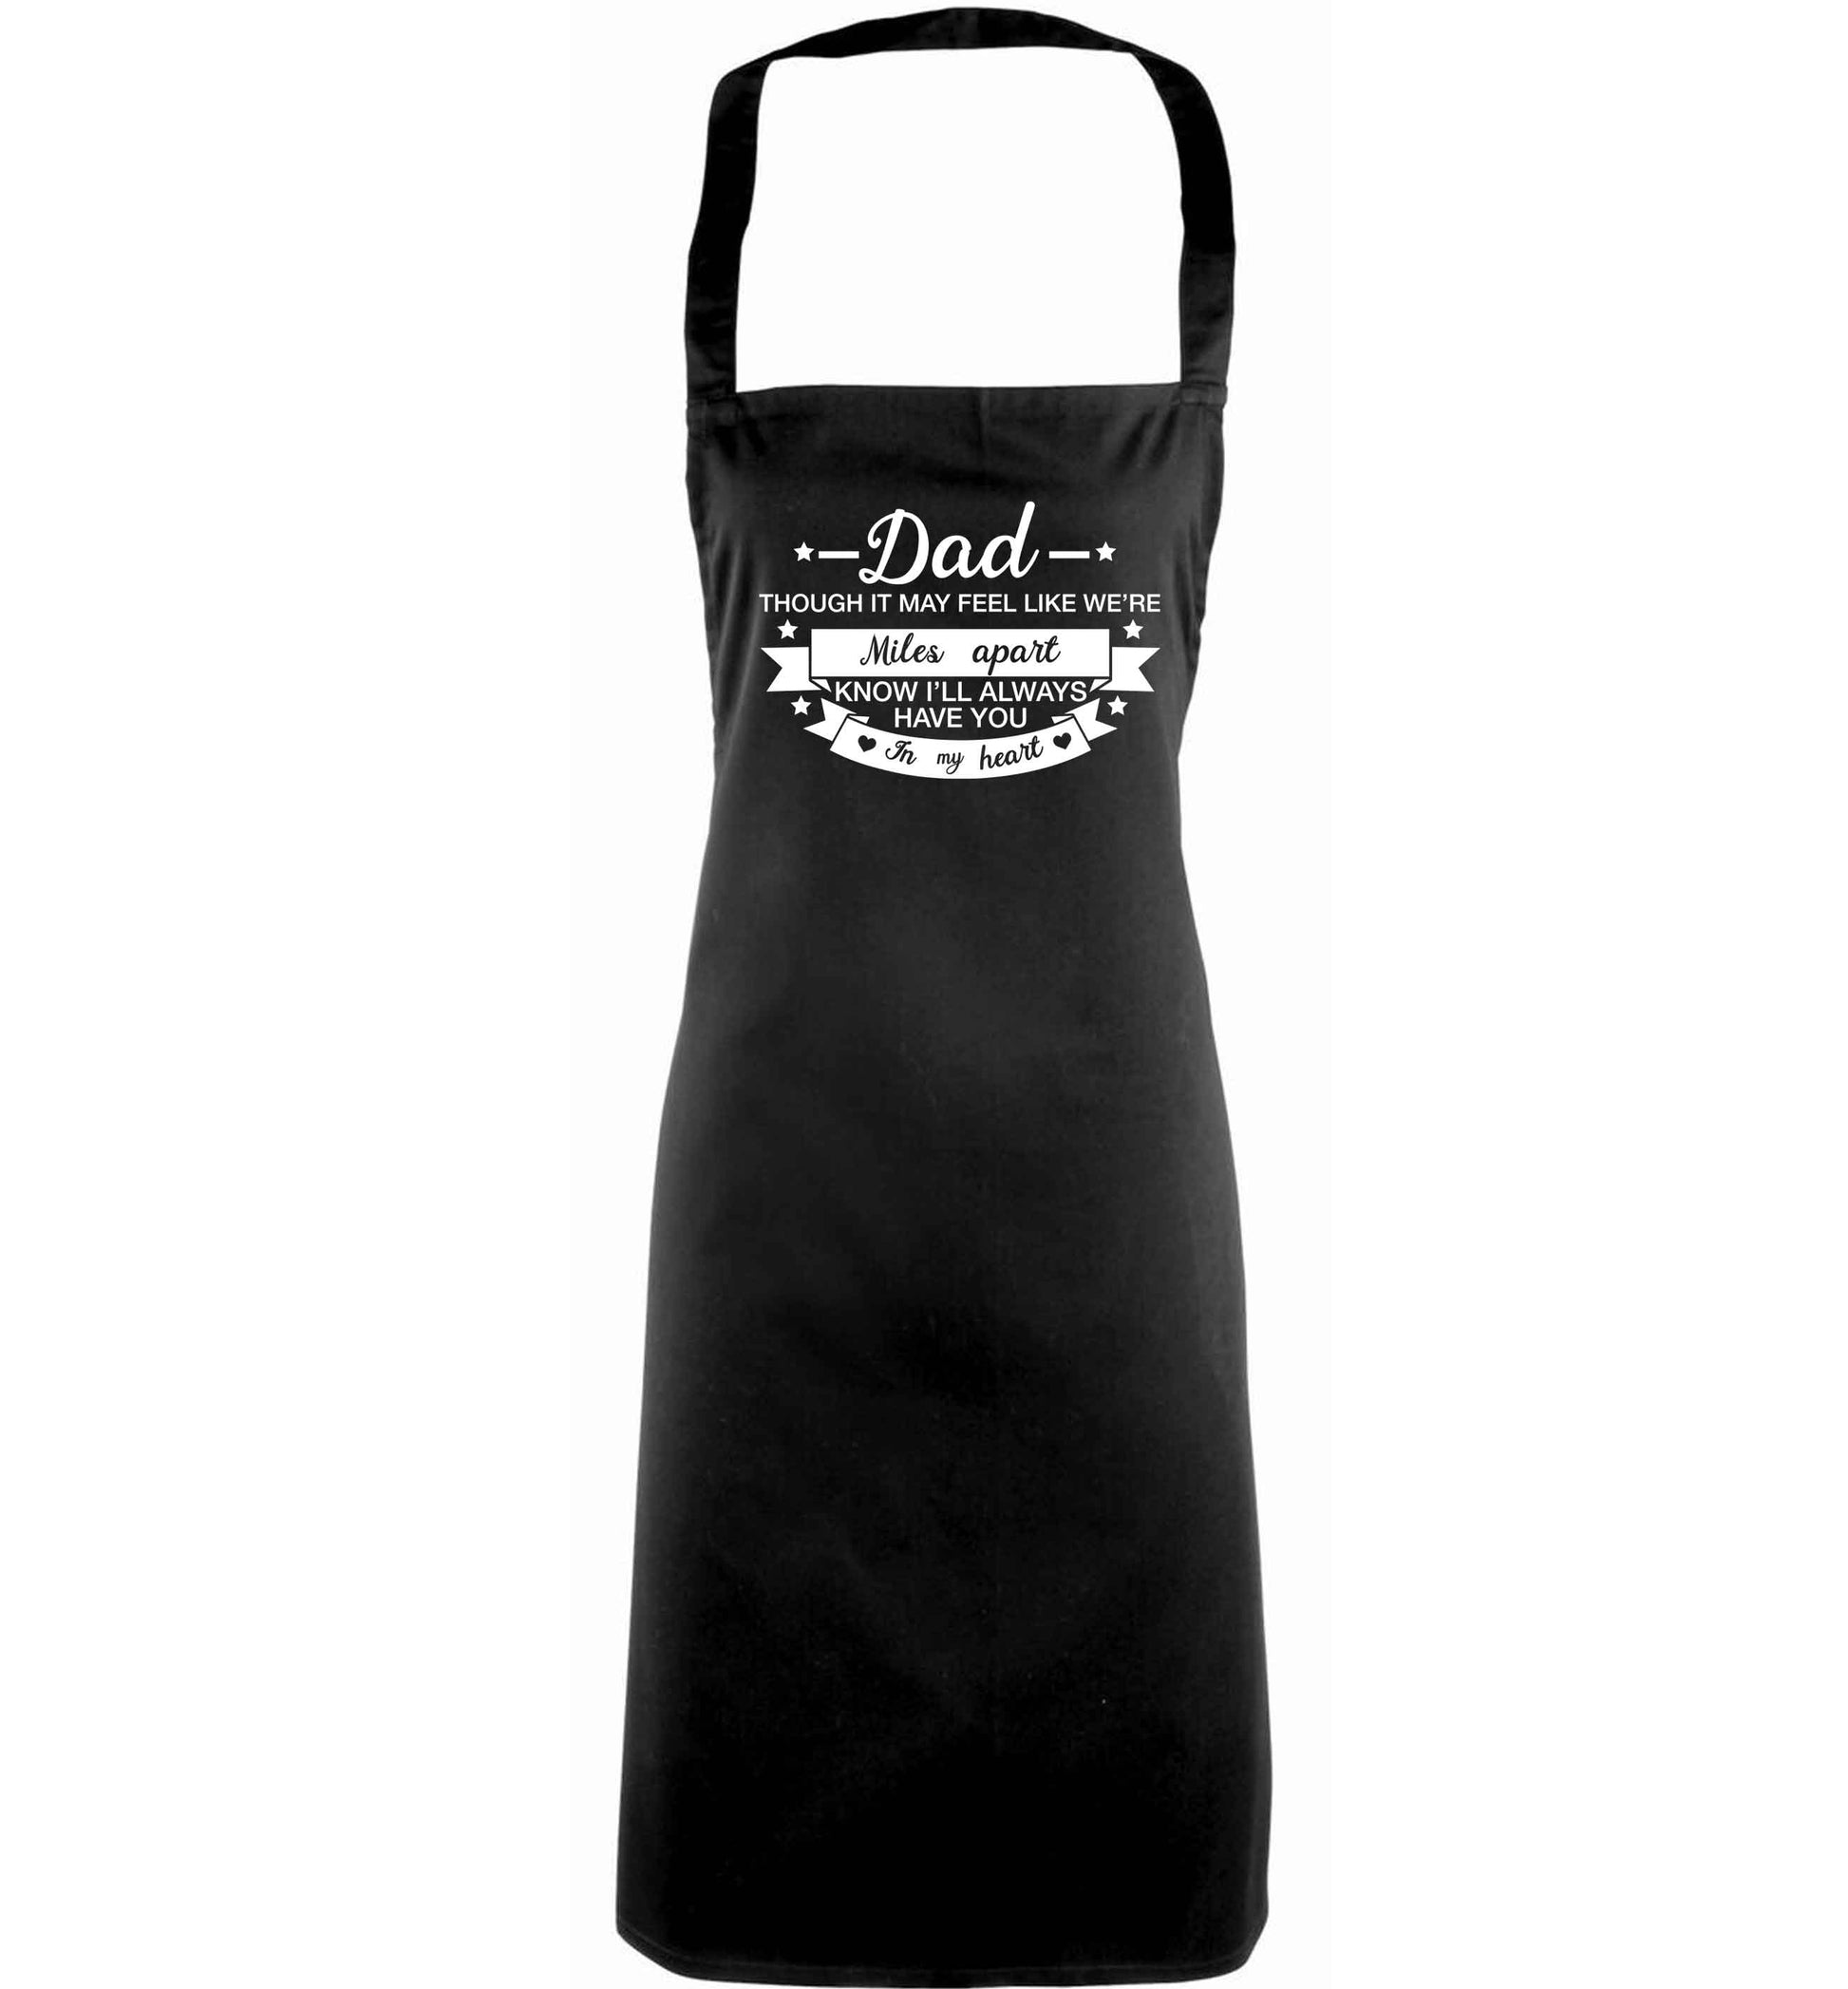 Dad though it may feel like we're miles apart know I'll always have you in my heart adults black apron